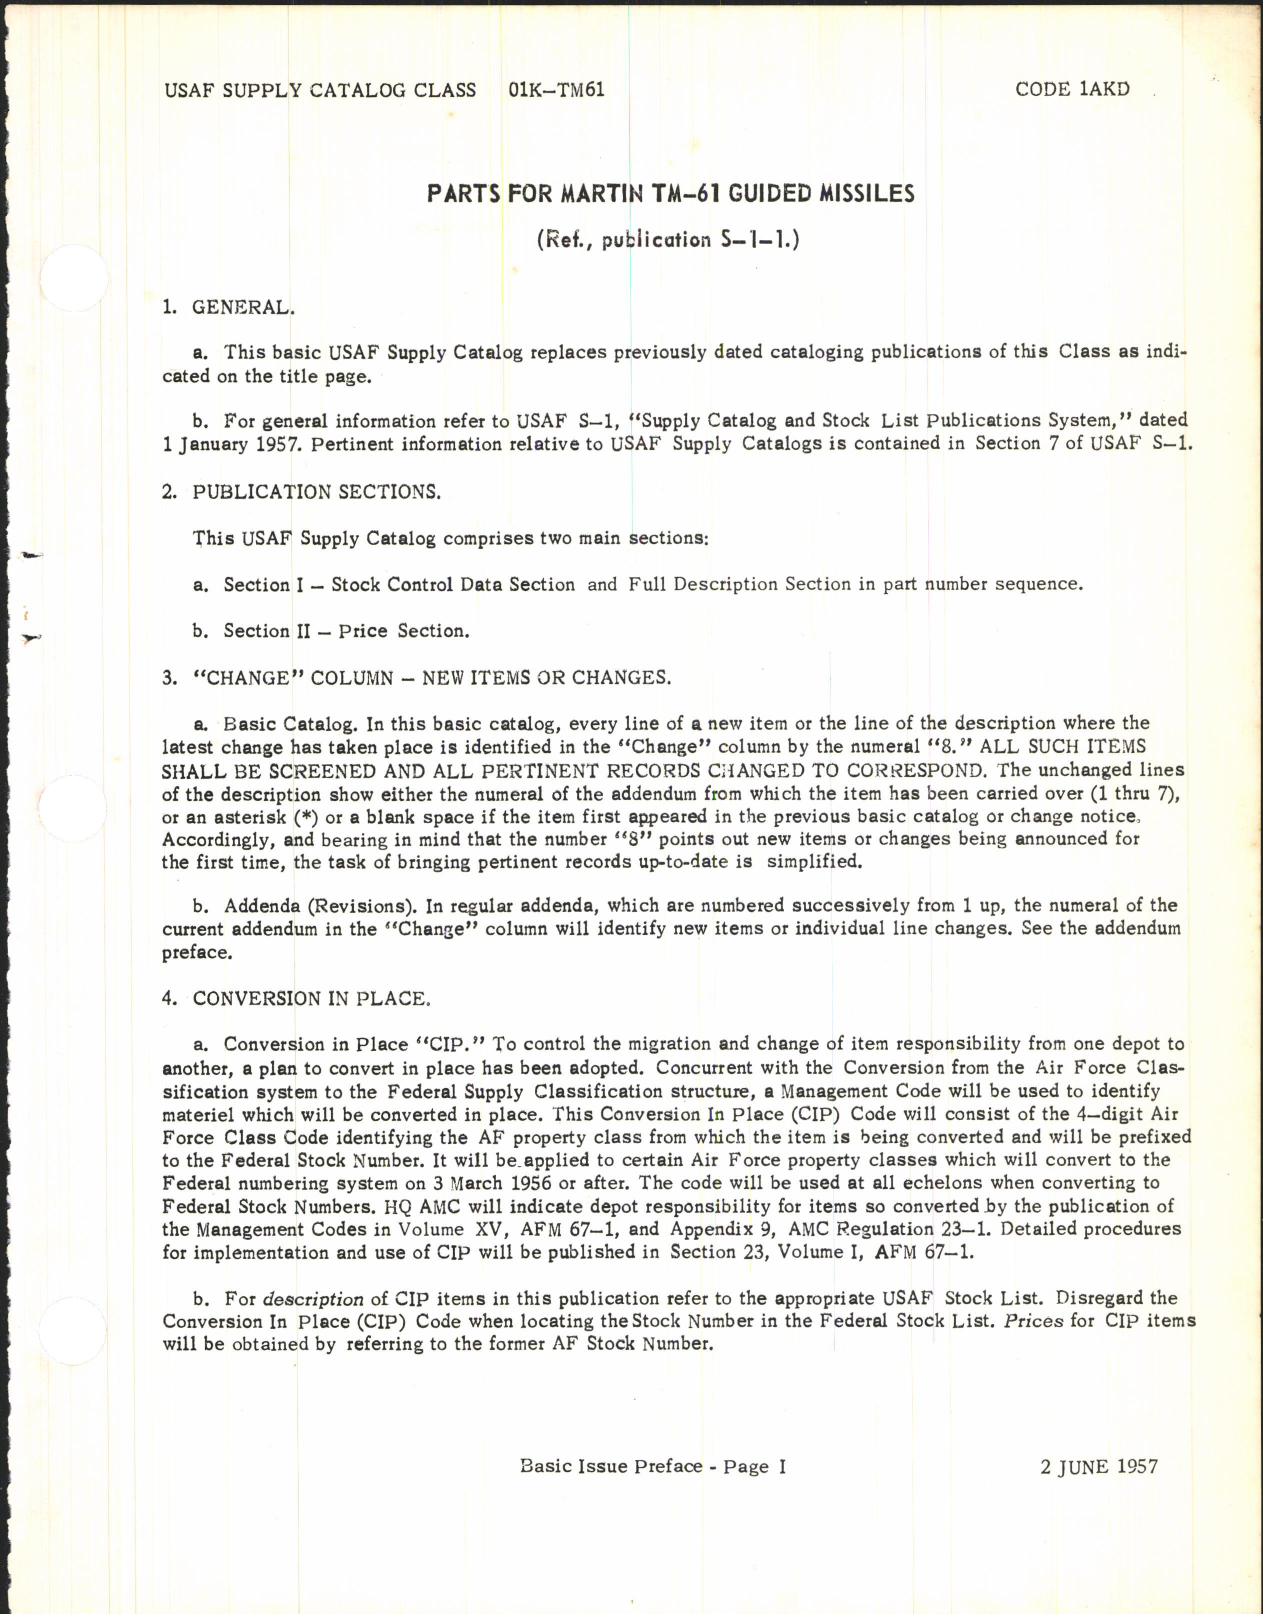 Sample page 3 from AirCorps Library document: Supply Catalog Parts for Martin TM-61 Guided Missile